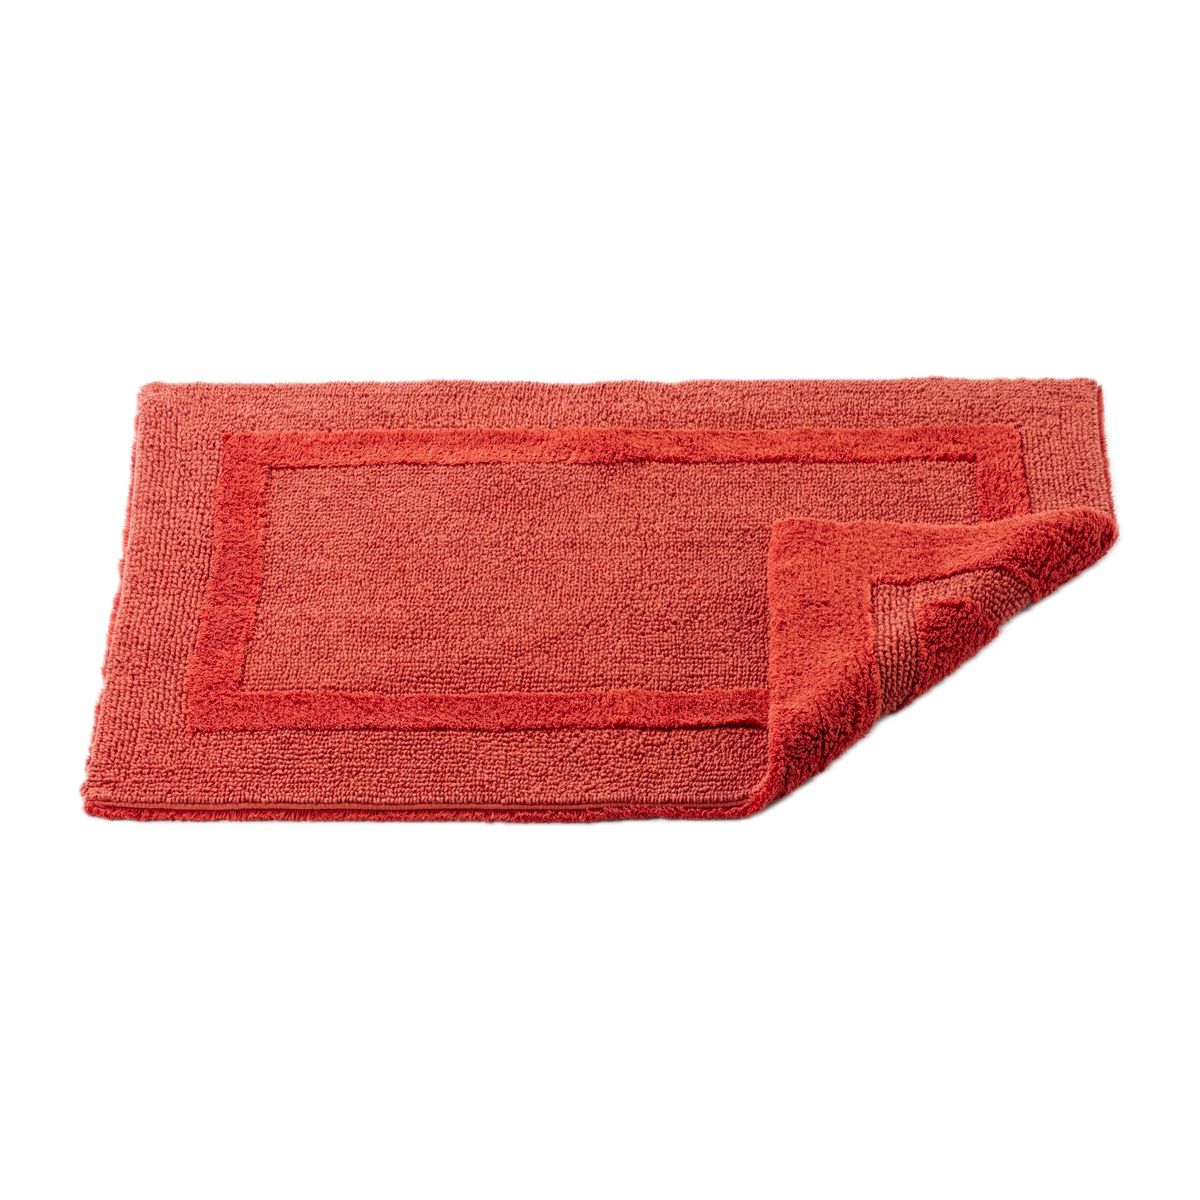 Abyss Habidecor Reversible Bath Rug in Chili Color with Corner Fold